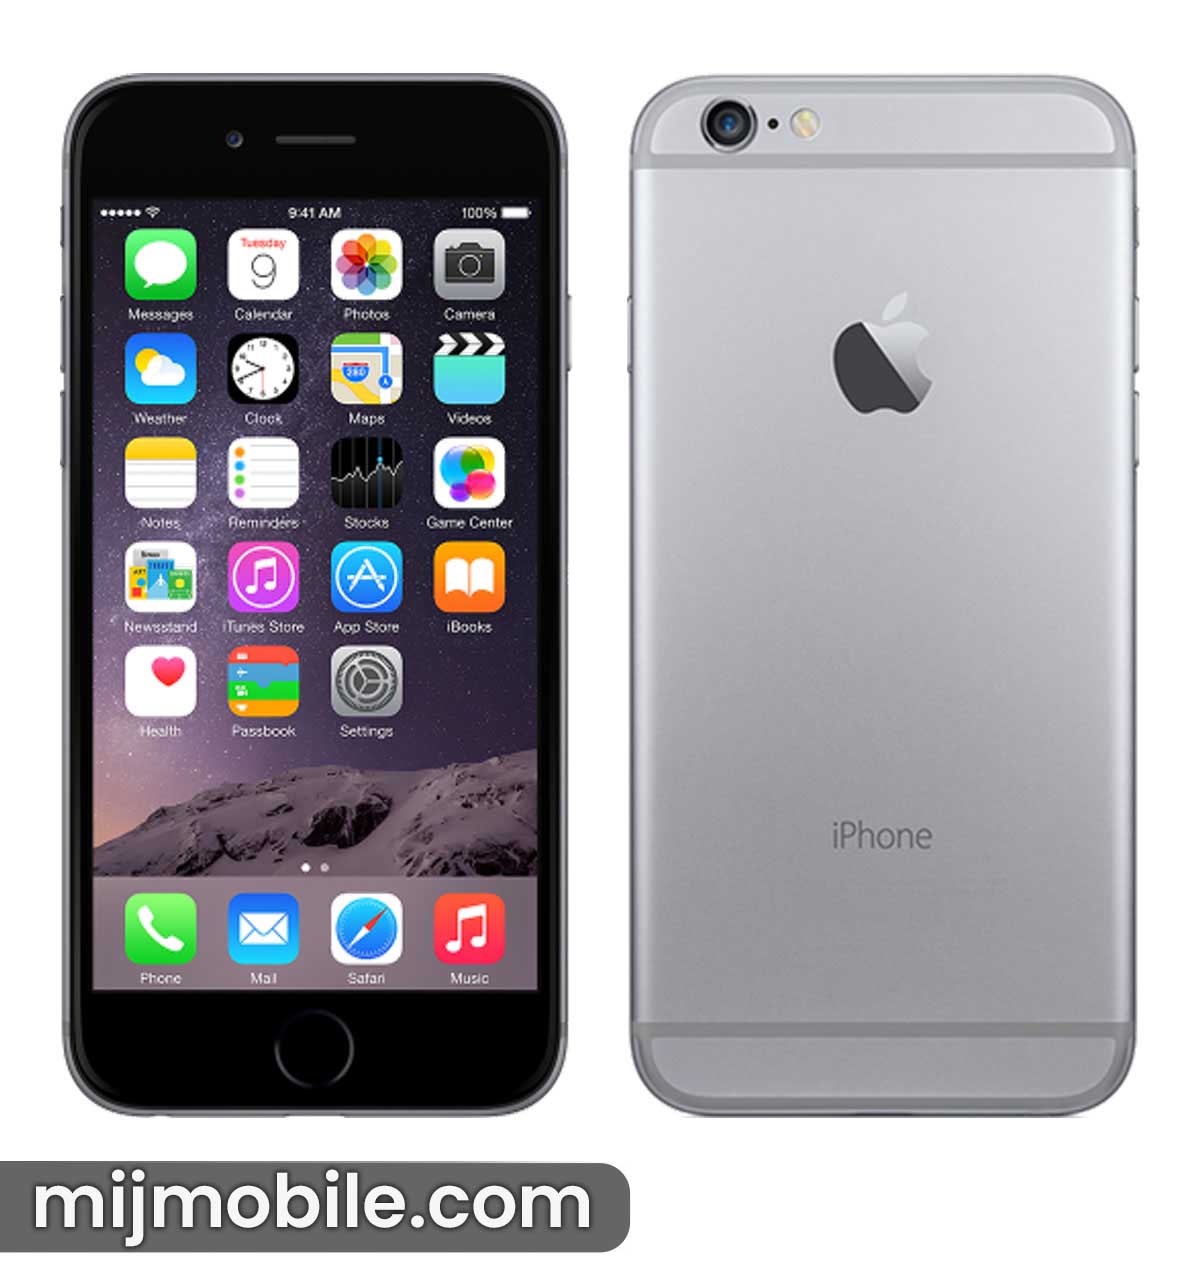 Apple iPhone 6 Price in Pakistan & Specifications Apple iPhone 6 Price in Pakistan is only 46,899.